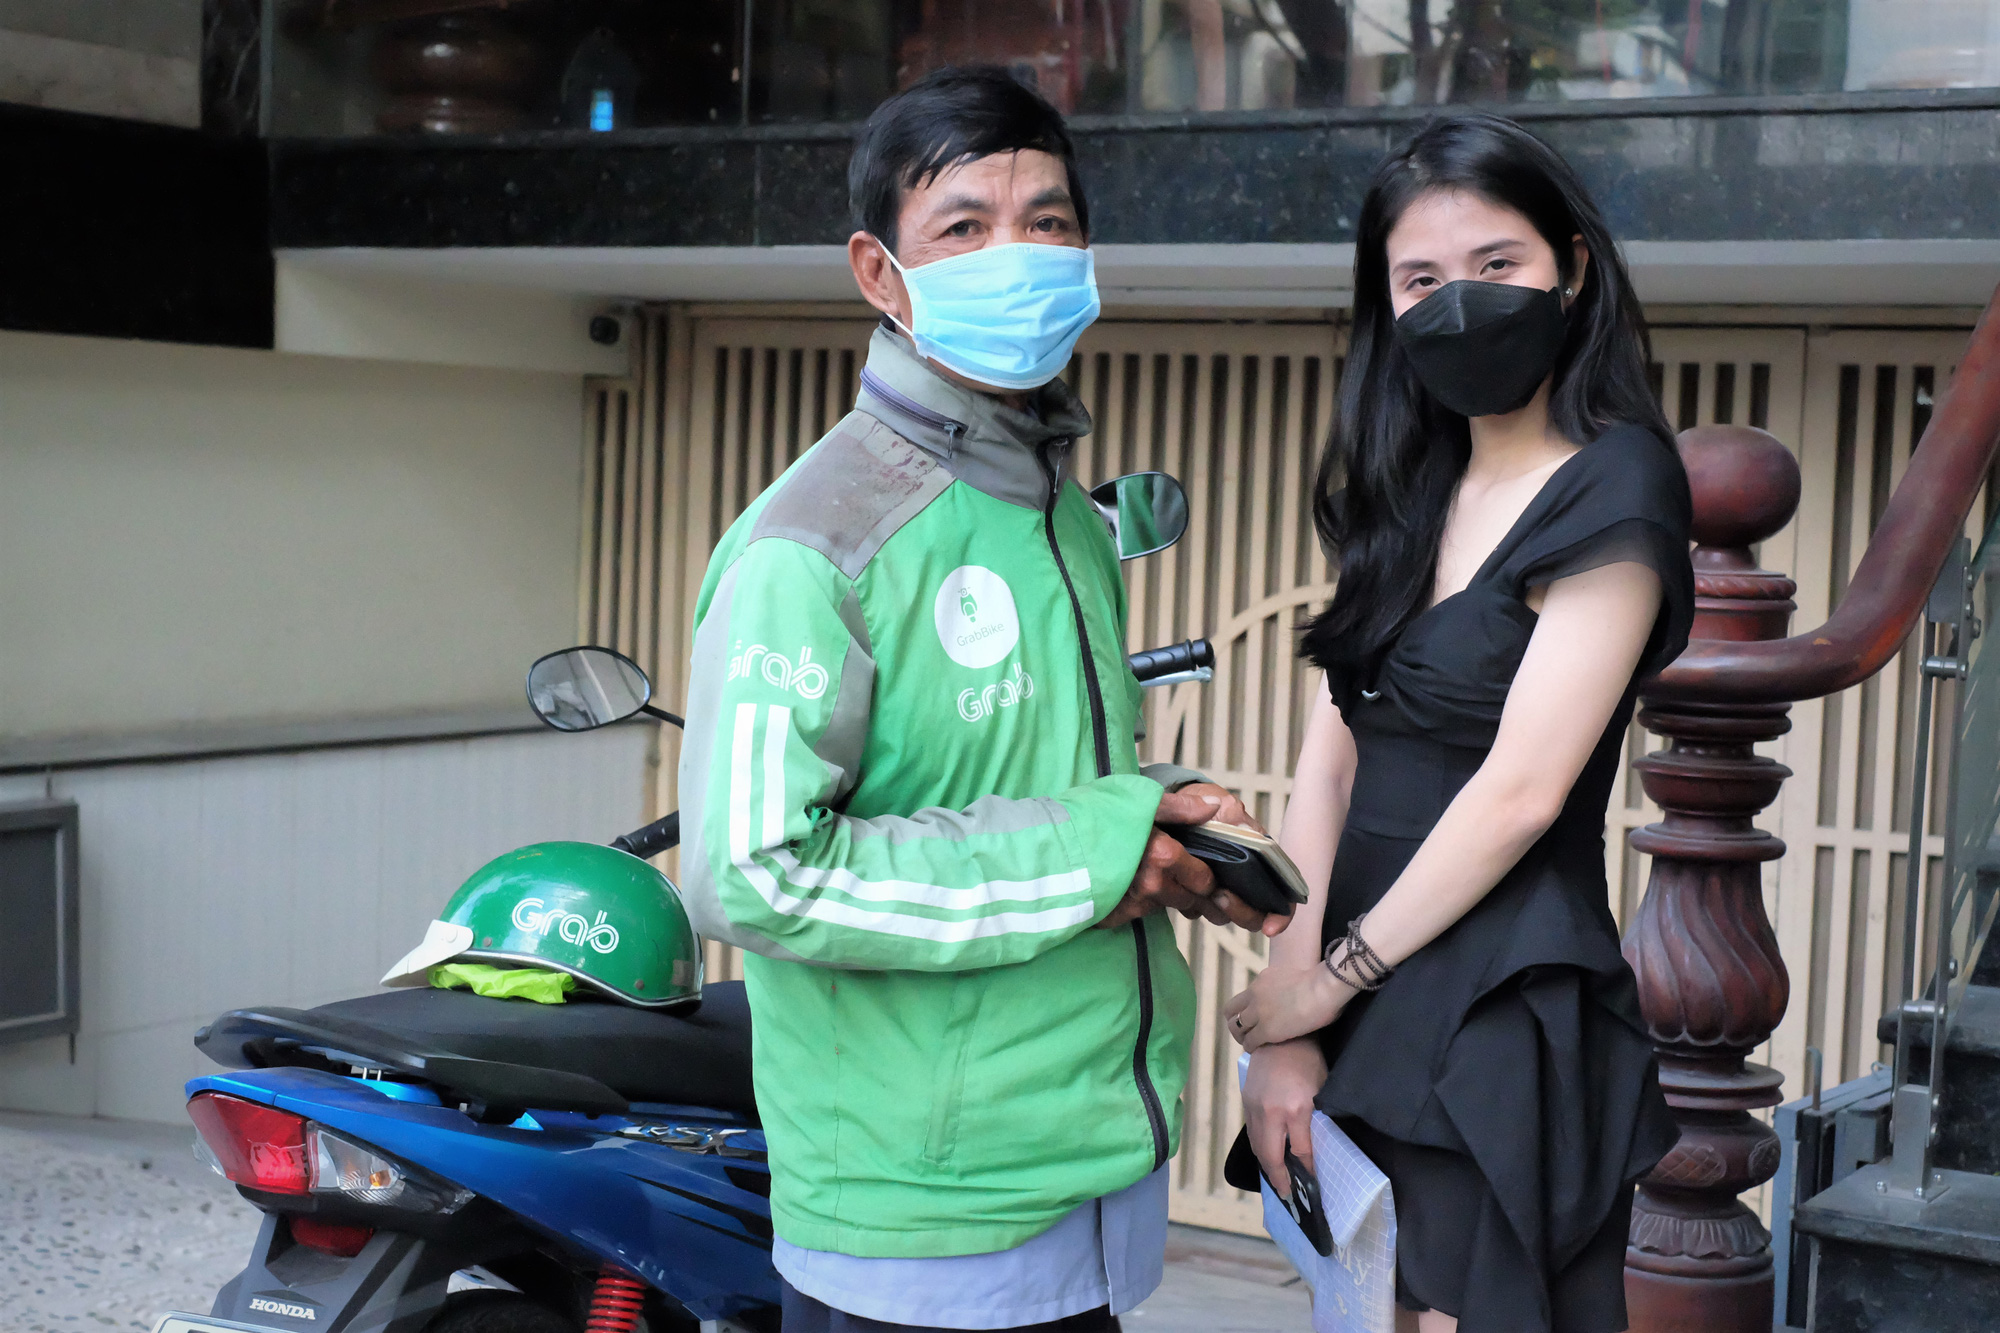 Nguyen Do Truc Phuong (right) and Hai, a poor motorbike taxi driver she helped raise money for in Ho Chi Minh City, are seen in a photo. Photo: Vu Thuy / Tuoi Tre